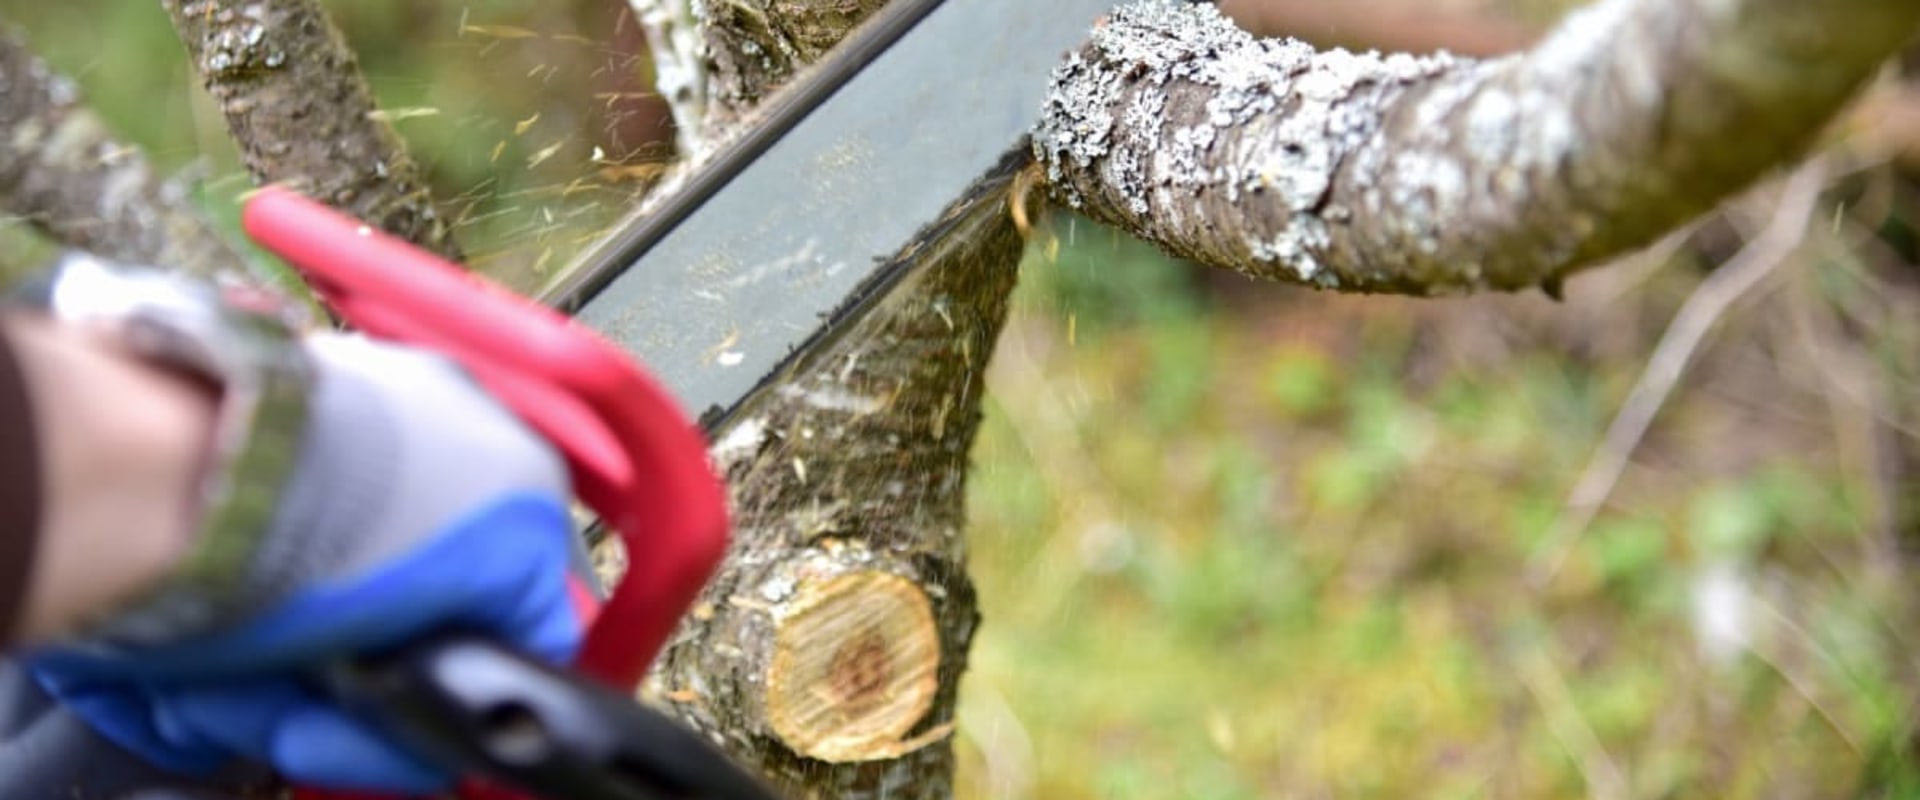 What state pays the most for tree service?